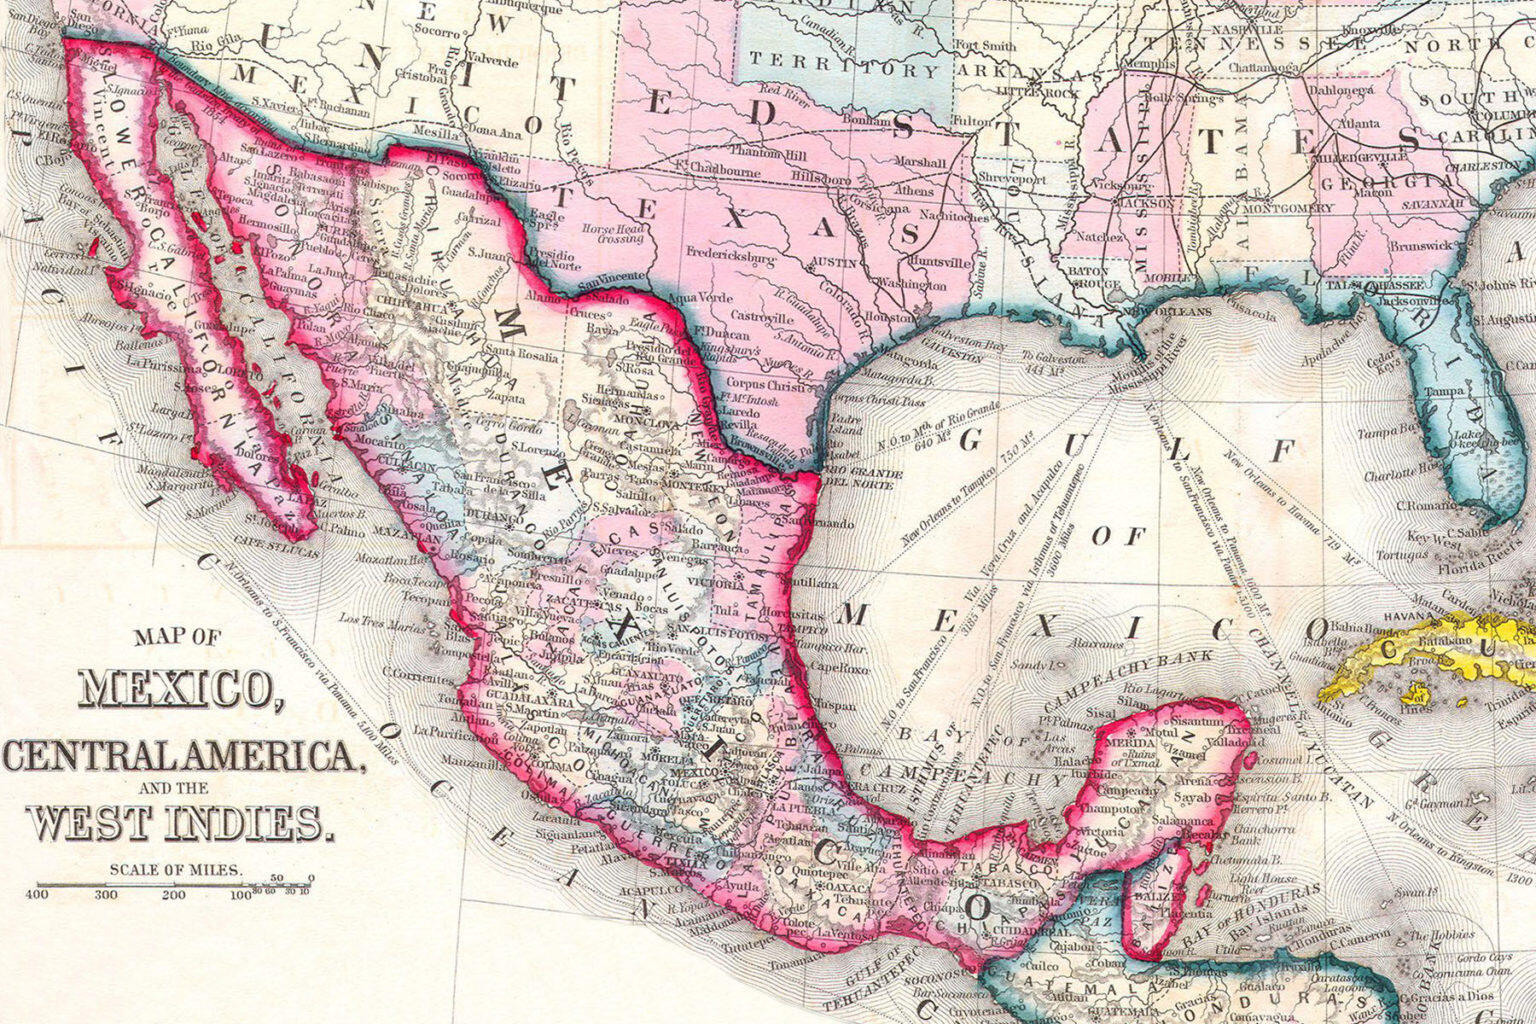 For some enslaved people in the south, escape to Mexico offered their best route to freedom. (Illustration/Samuel Augustus Mitchell, Public Domain, via Wikimedia Commons)